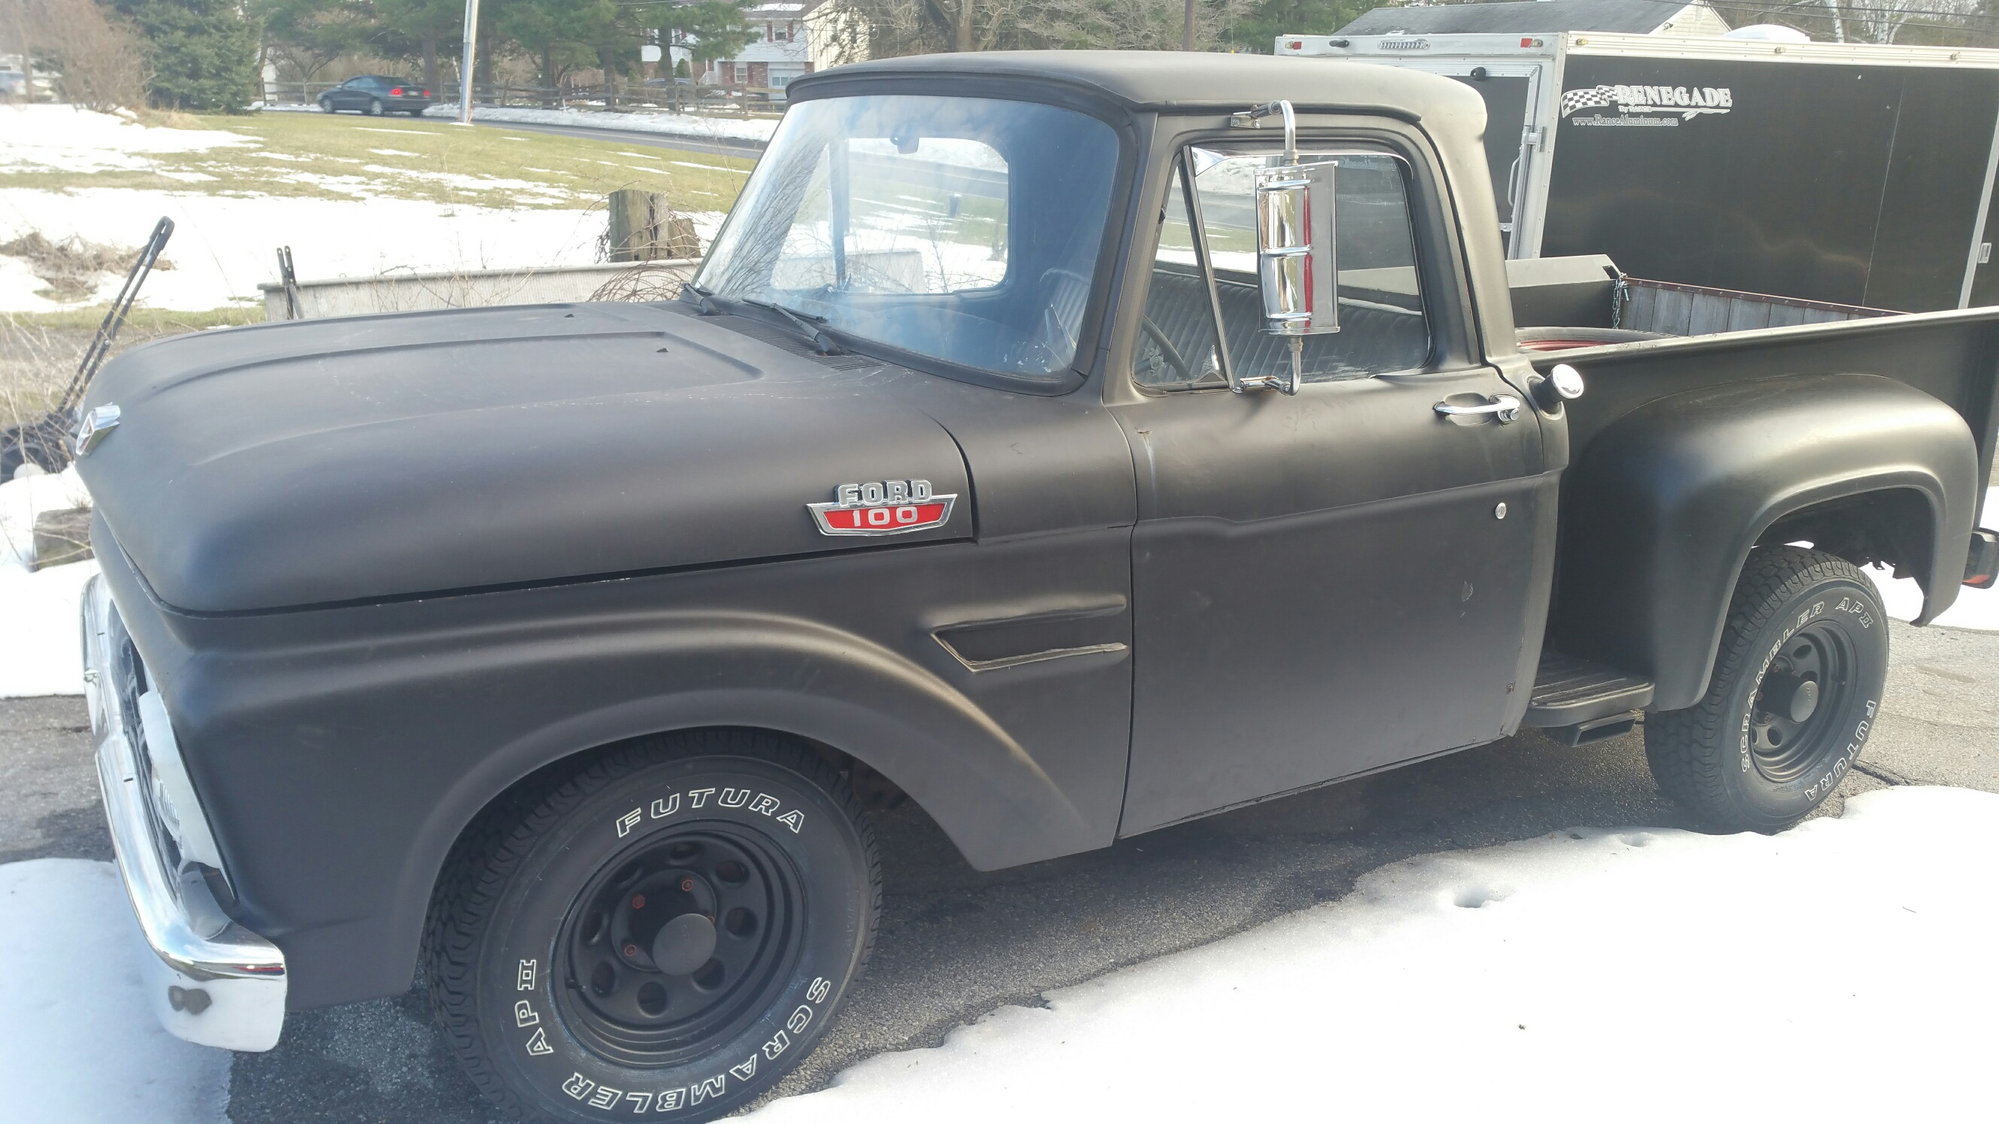 1964 Ford F-100 - 1964 F100 Flareside for Sale - Used - VIN F10JH436453777777 - 999,999,999 Miles - 8 cyl - 2WD - Automatic - Truck - Black - Downingtown, PA 19335, United States